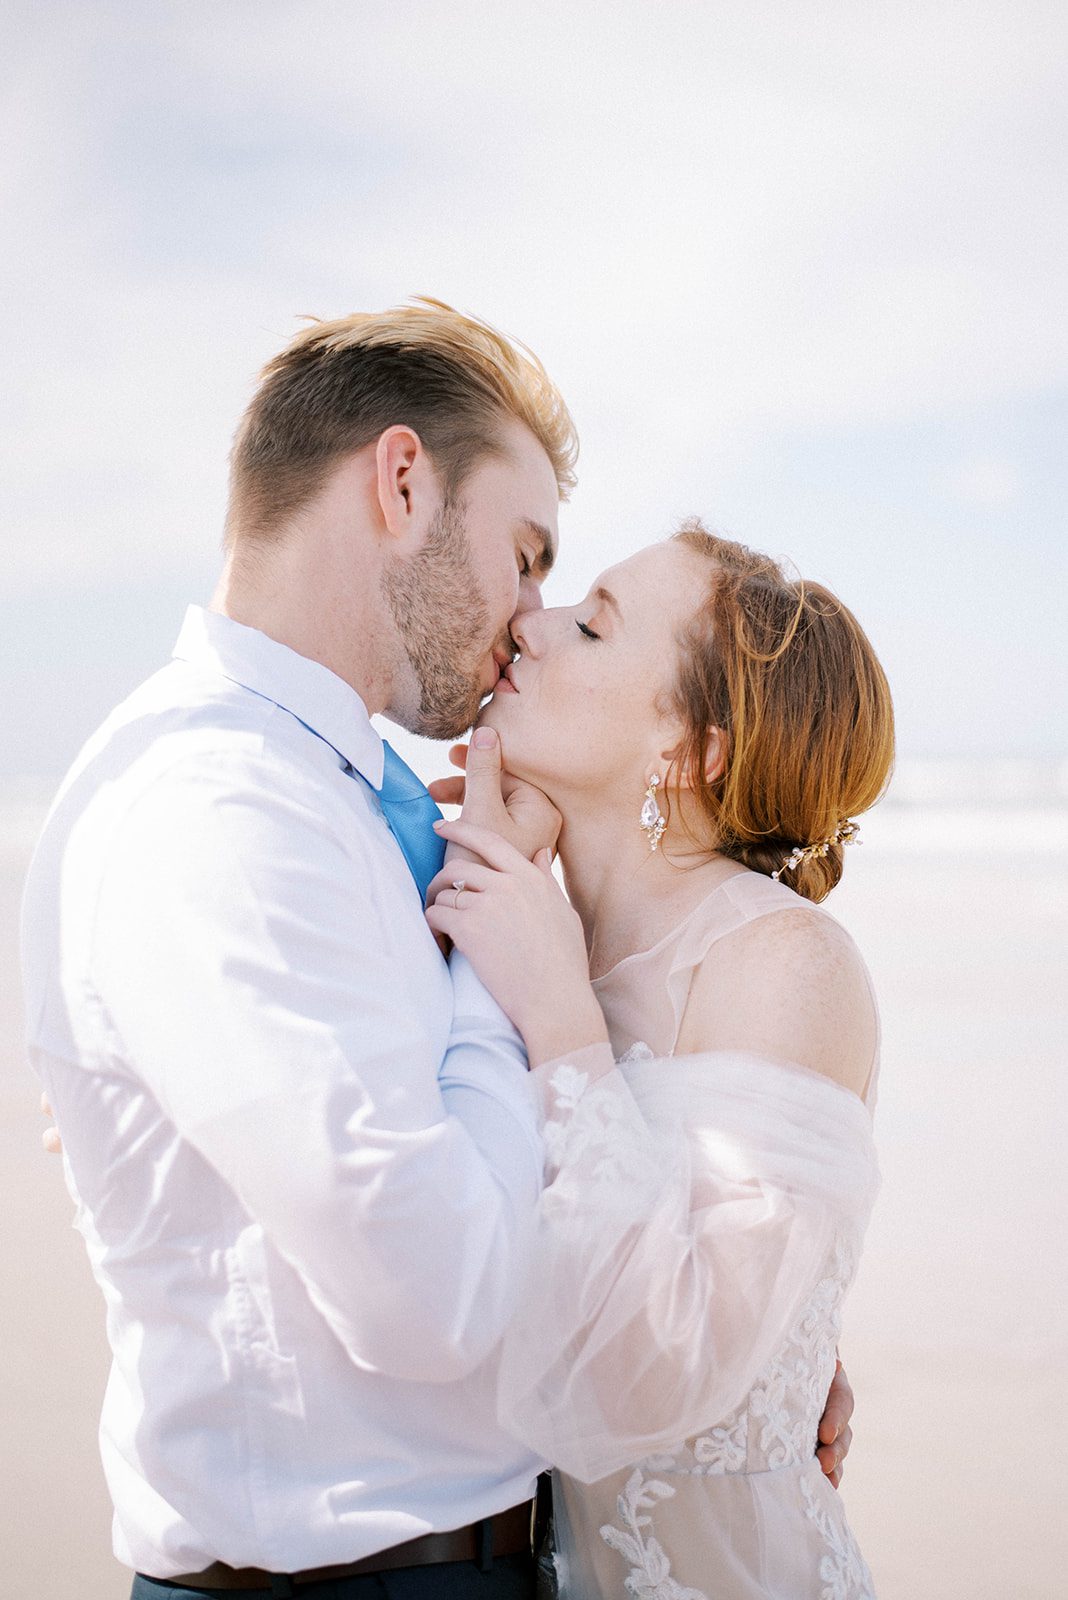 Florida beach wedding with bride and groom kissing each other passionately on the beach while the re head bride wears a lave and tulle gown and the groom is in a white shirt